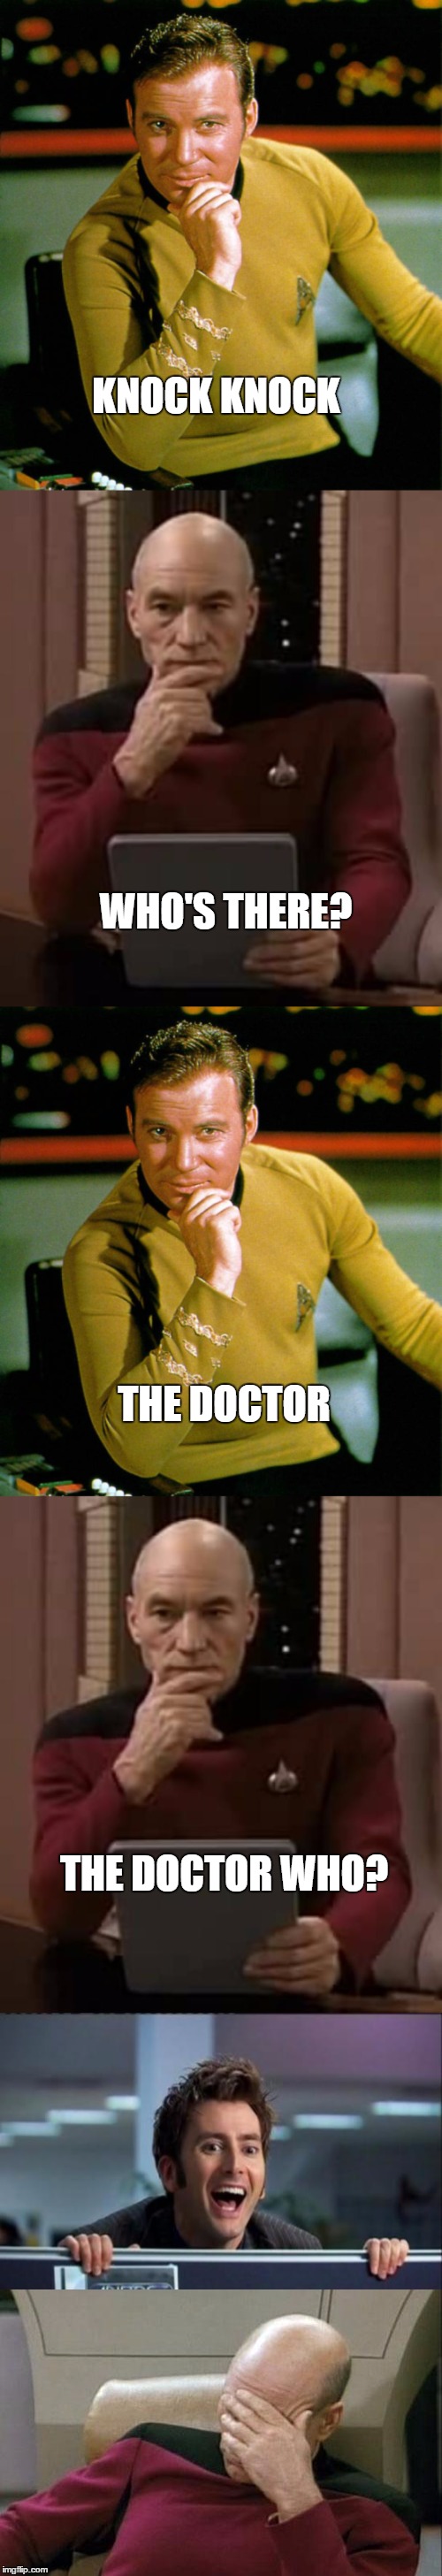 Bad knock knock joke Star Trek. | KNOCK KNOCK; WHO'S THERE? THE DOCTOR; THE DOCTOR WHO? | image tagged in captain kirk,captain picard | made w/ Imgflip meme maker